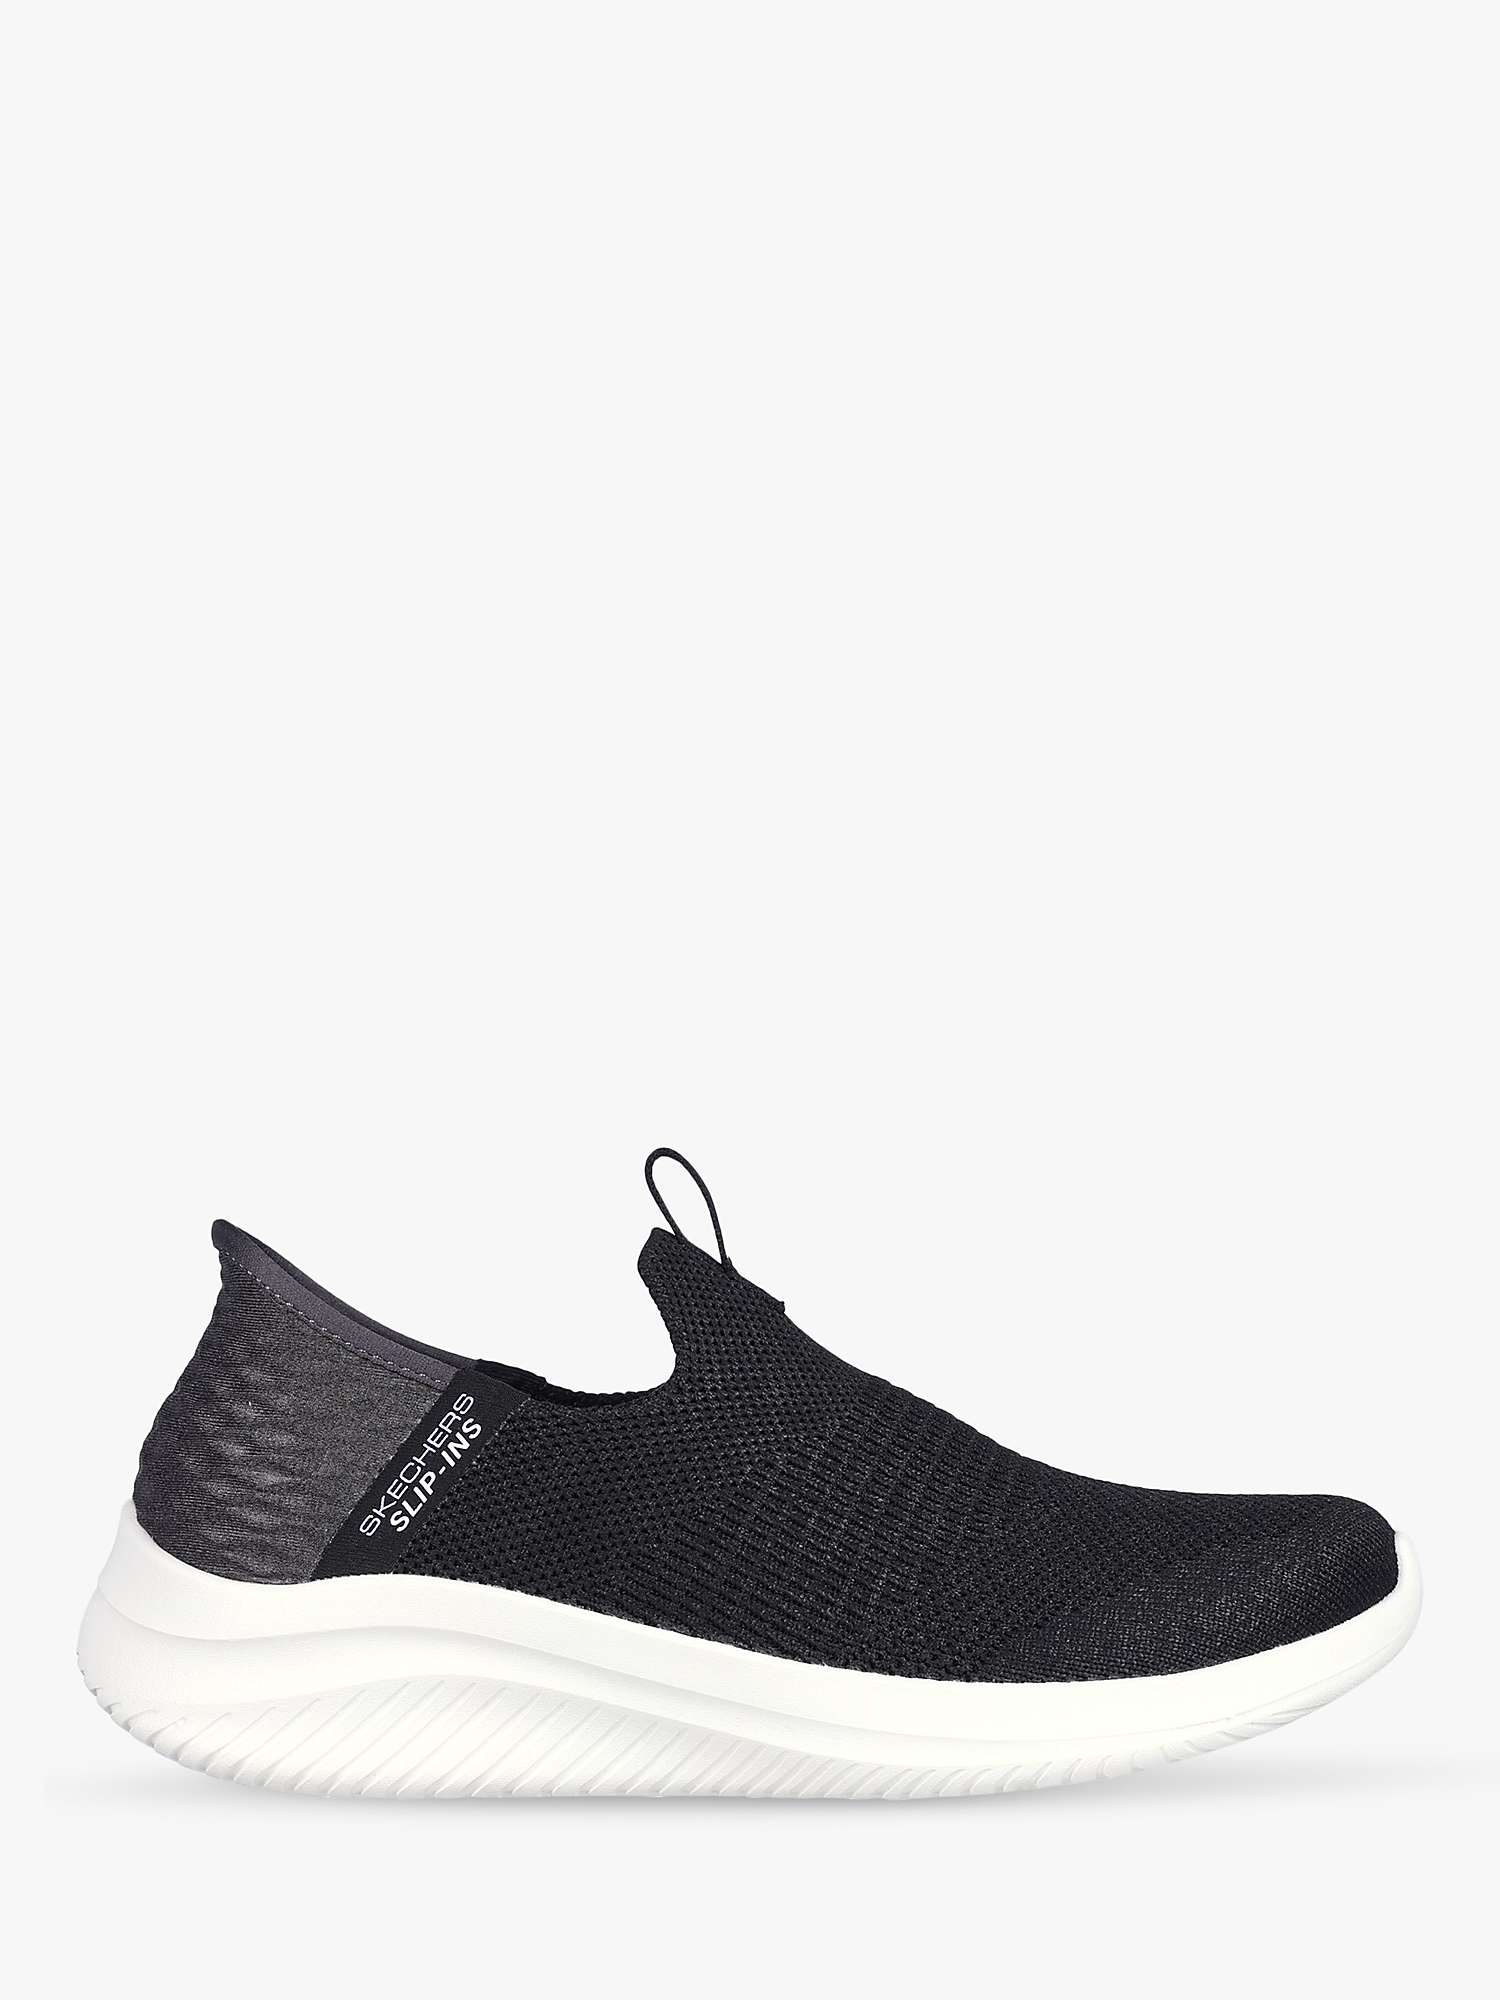 Buy Skechers Ultra Flex 3.0 Smooth Step Sports Shoes Online at johnlewis.com